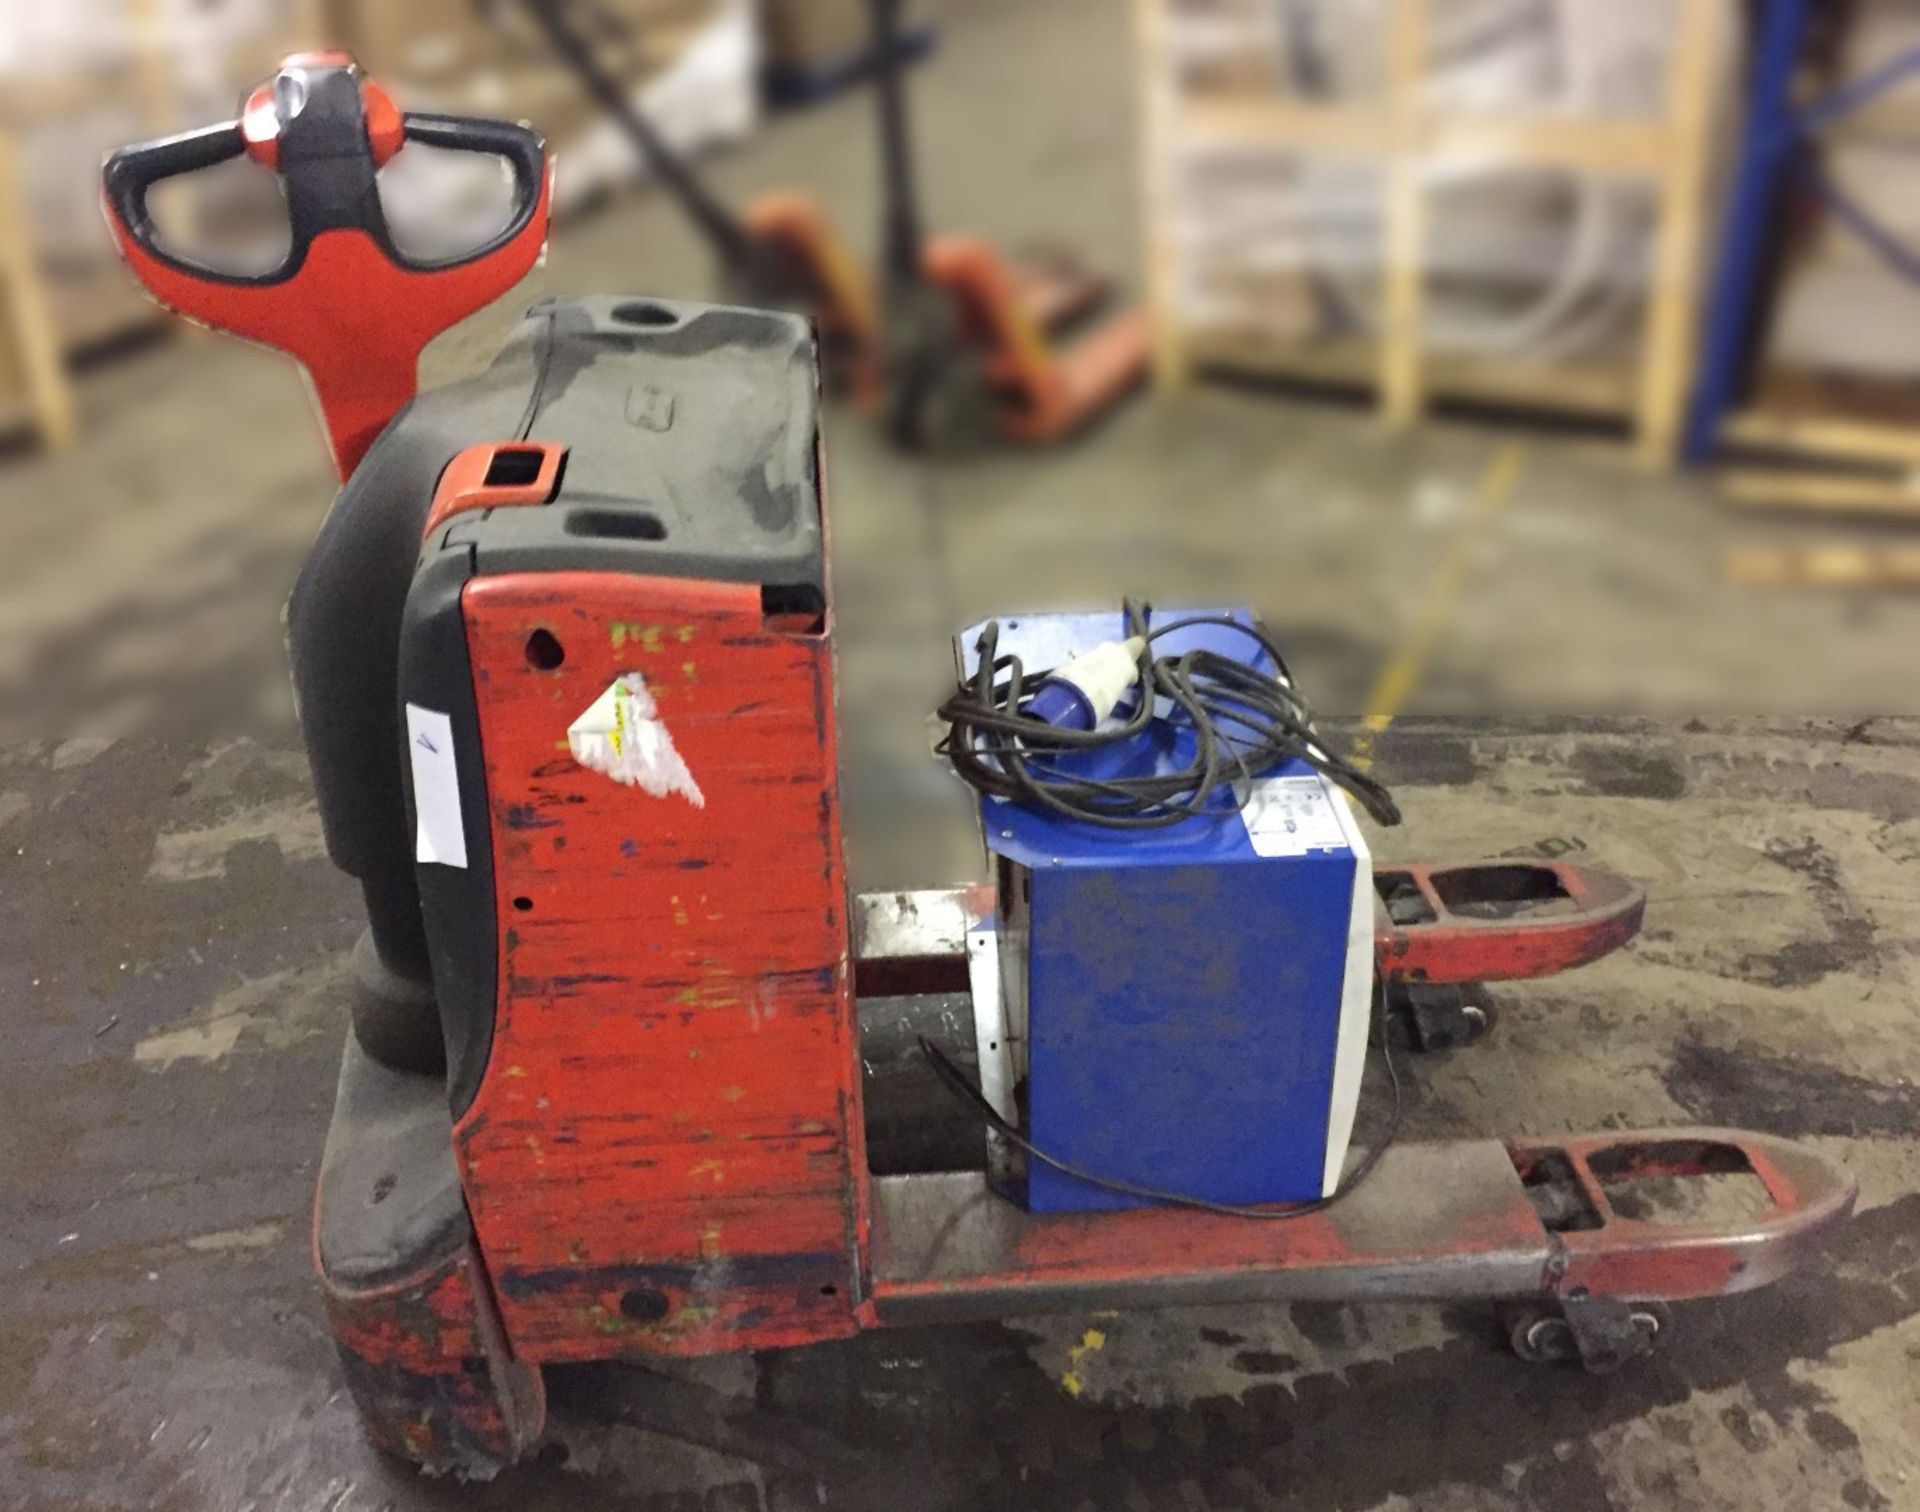 1 x Linde T20 Electric Pallet Truck - Tested and Working - Charger Included - CL007 - Ref: T20/1 - - Image 8 of 12